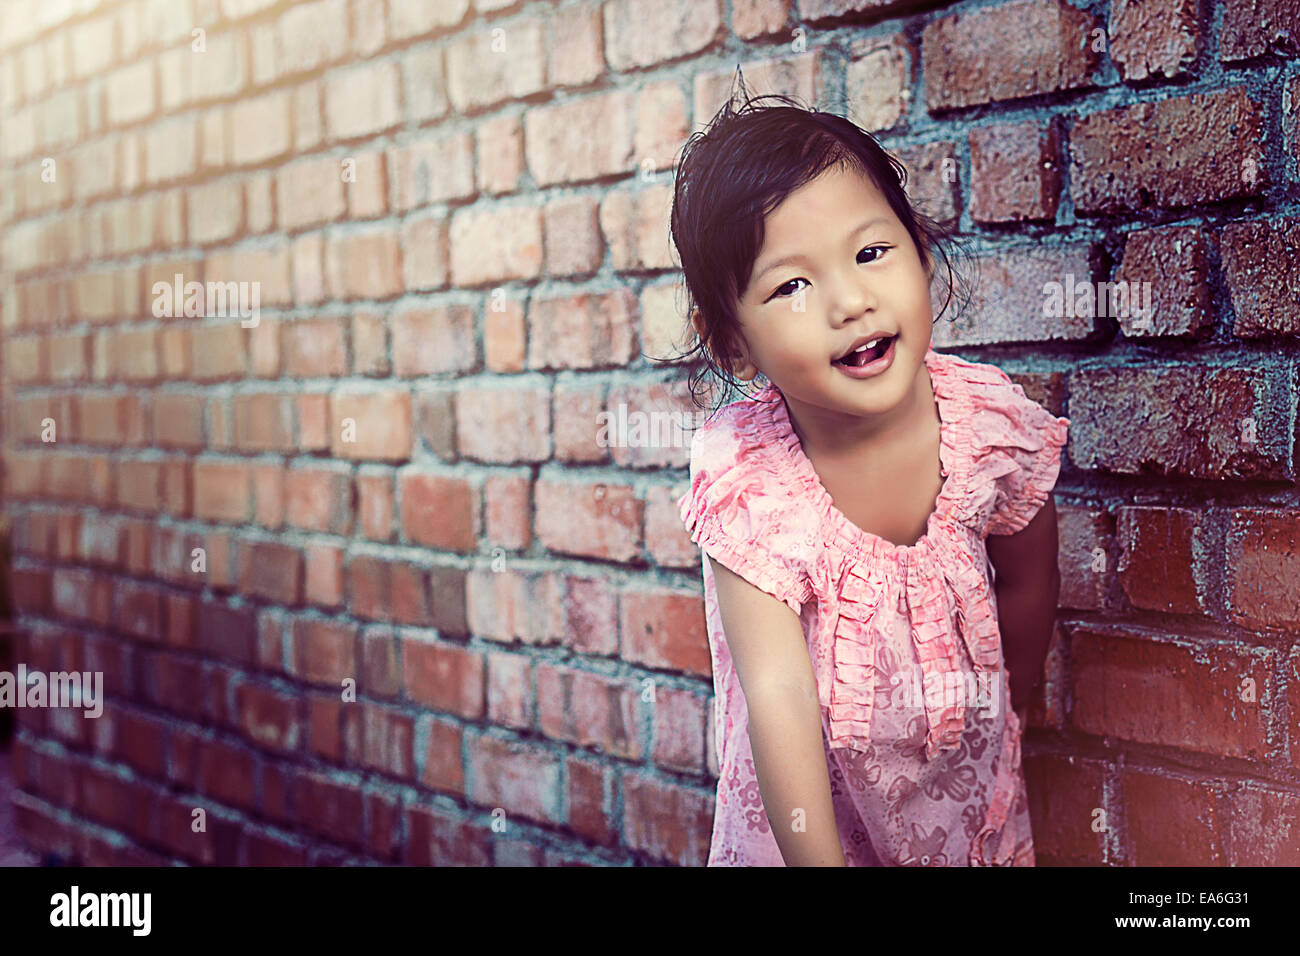 Portrait of girl leaning against wall Stock Photo